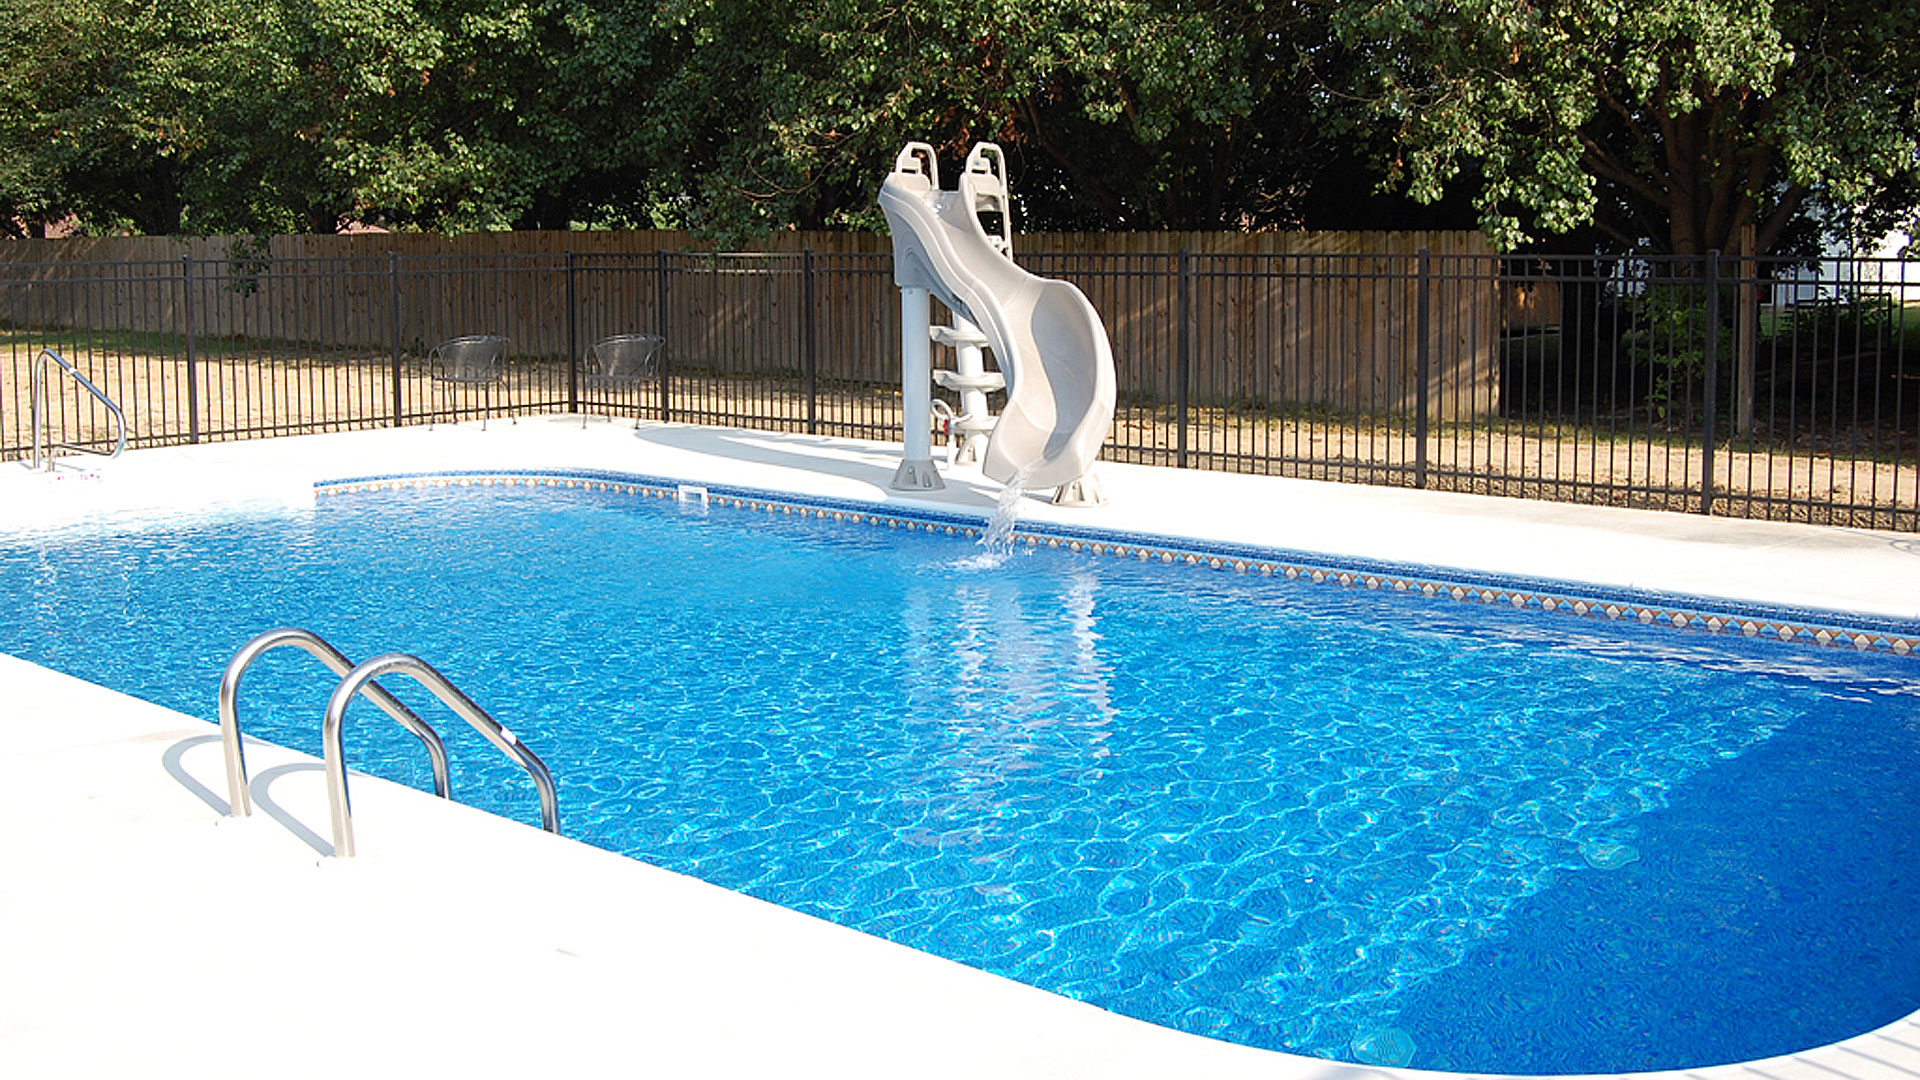 A pool with a slide.